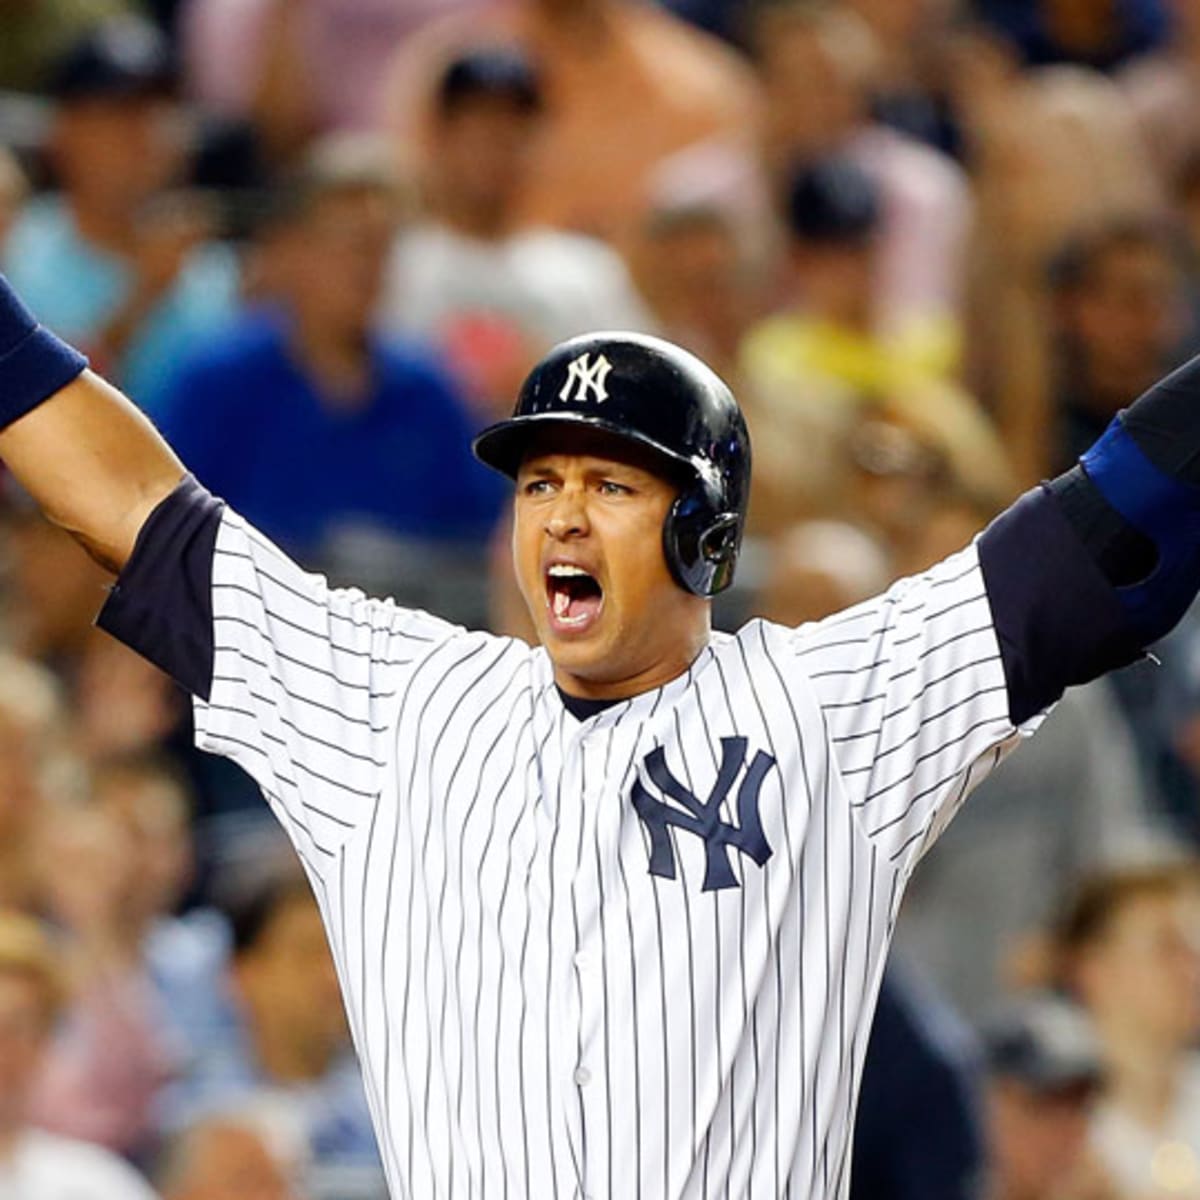 A-Rod to receive 3,000th ball from fan who caught it